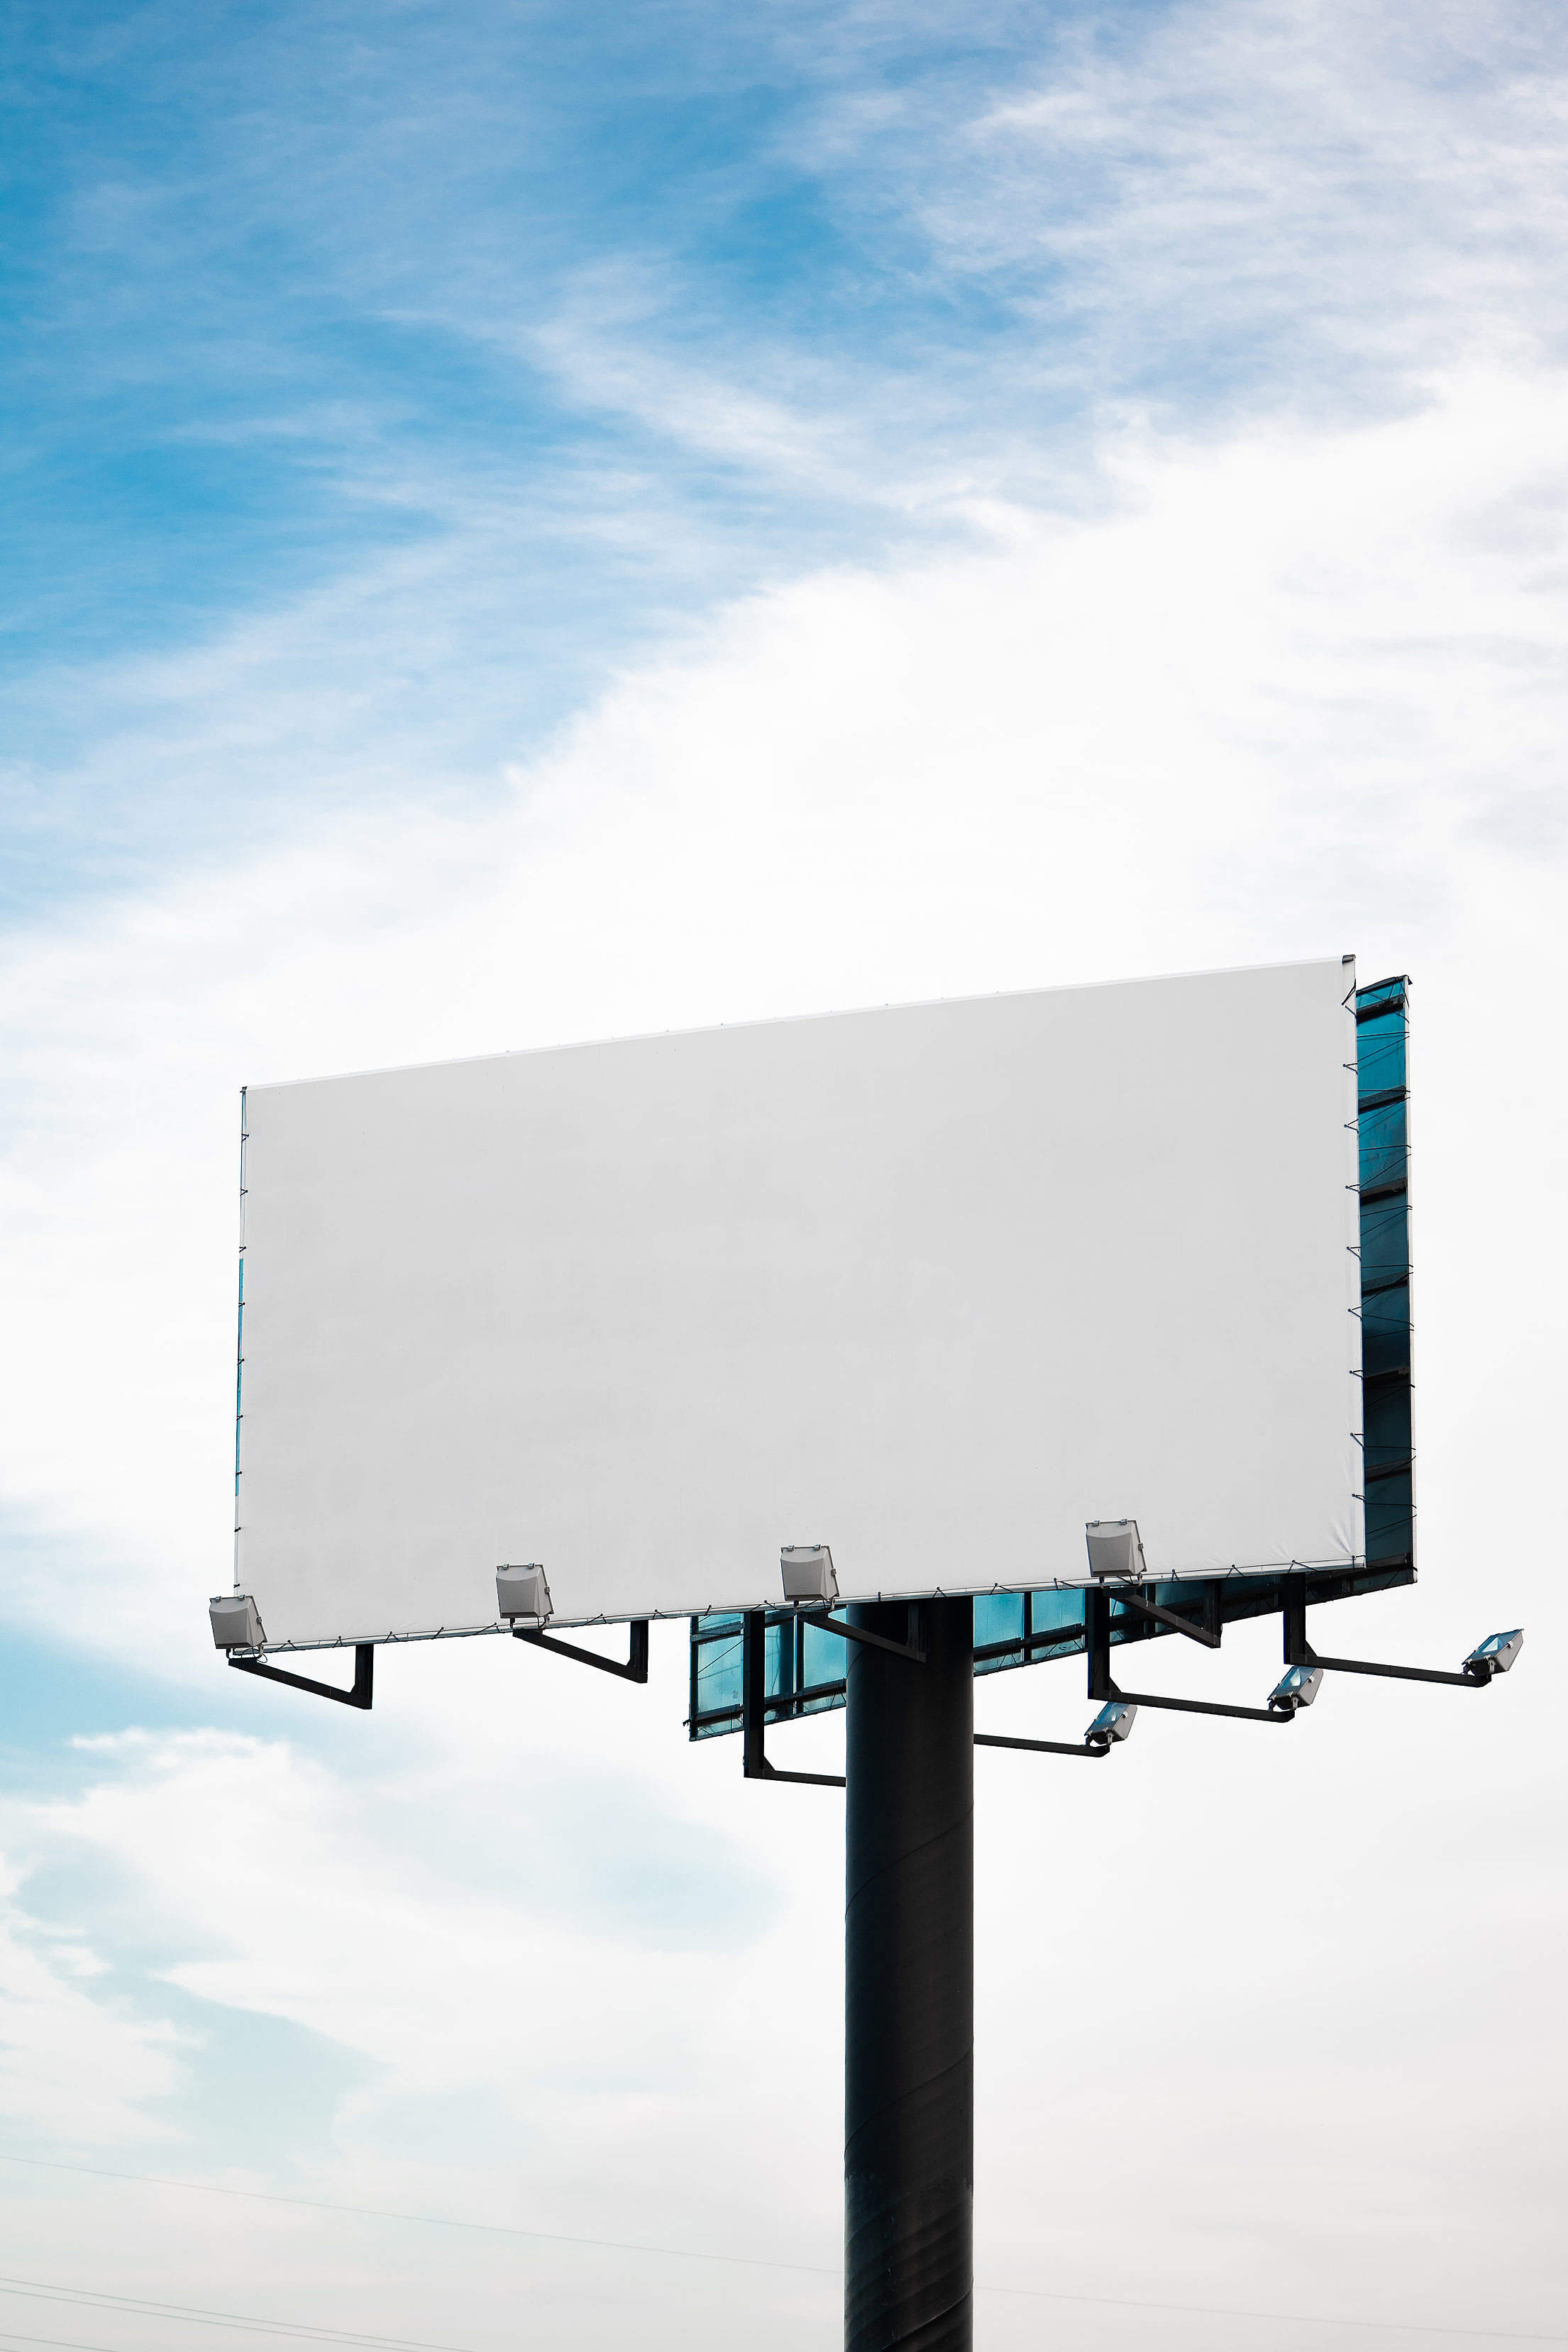 Blank Billboard For Advertising With Cloudy Sky Background Free Stock Photo